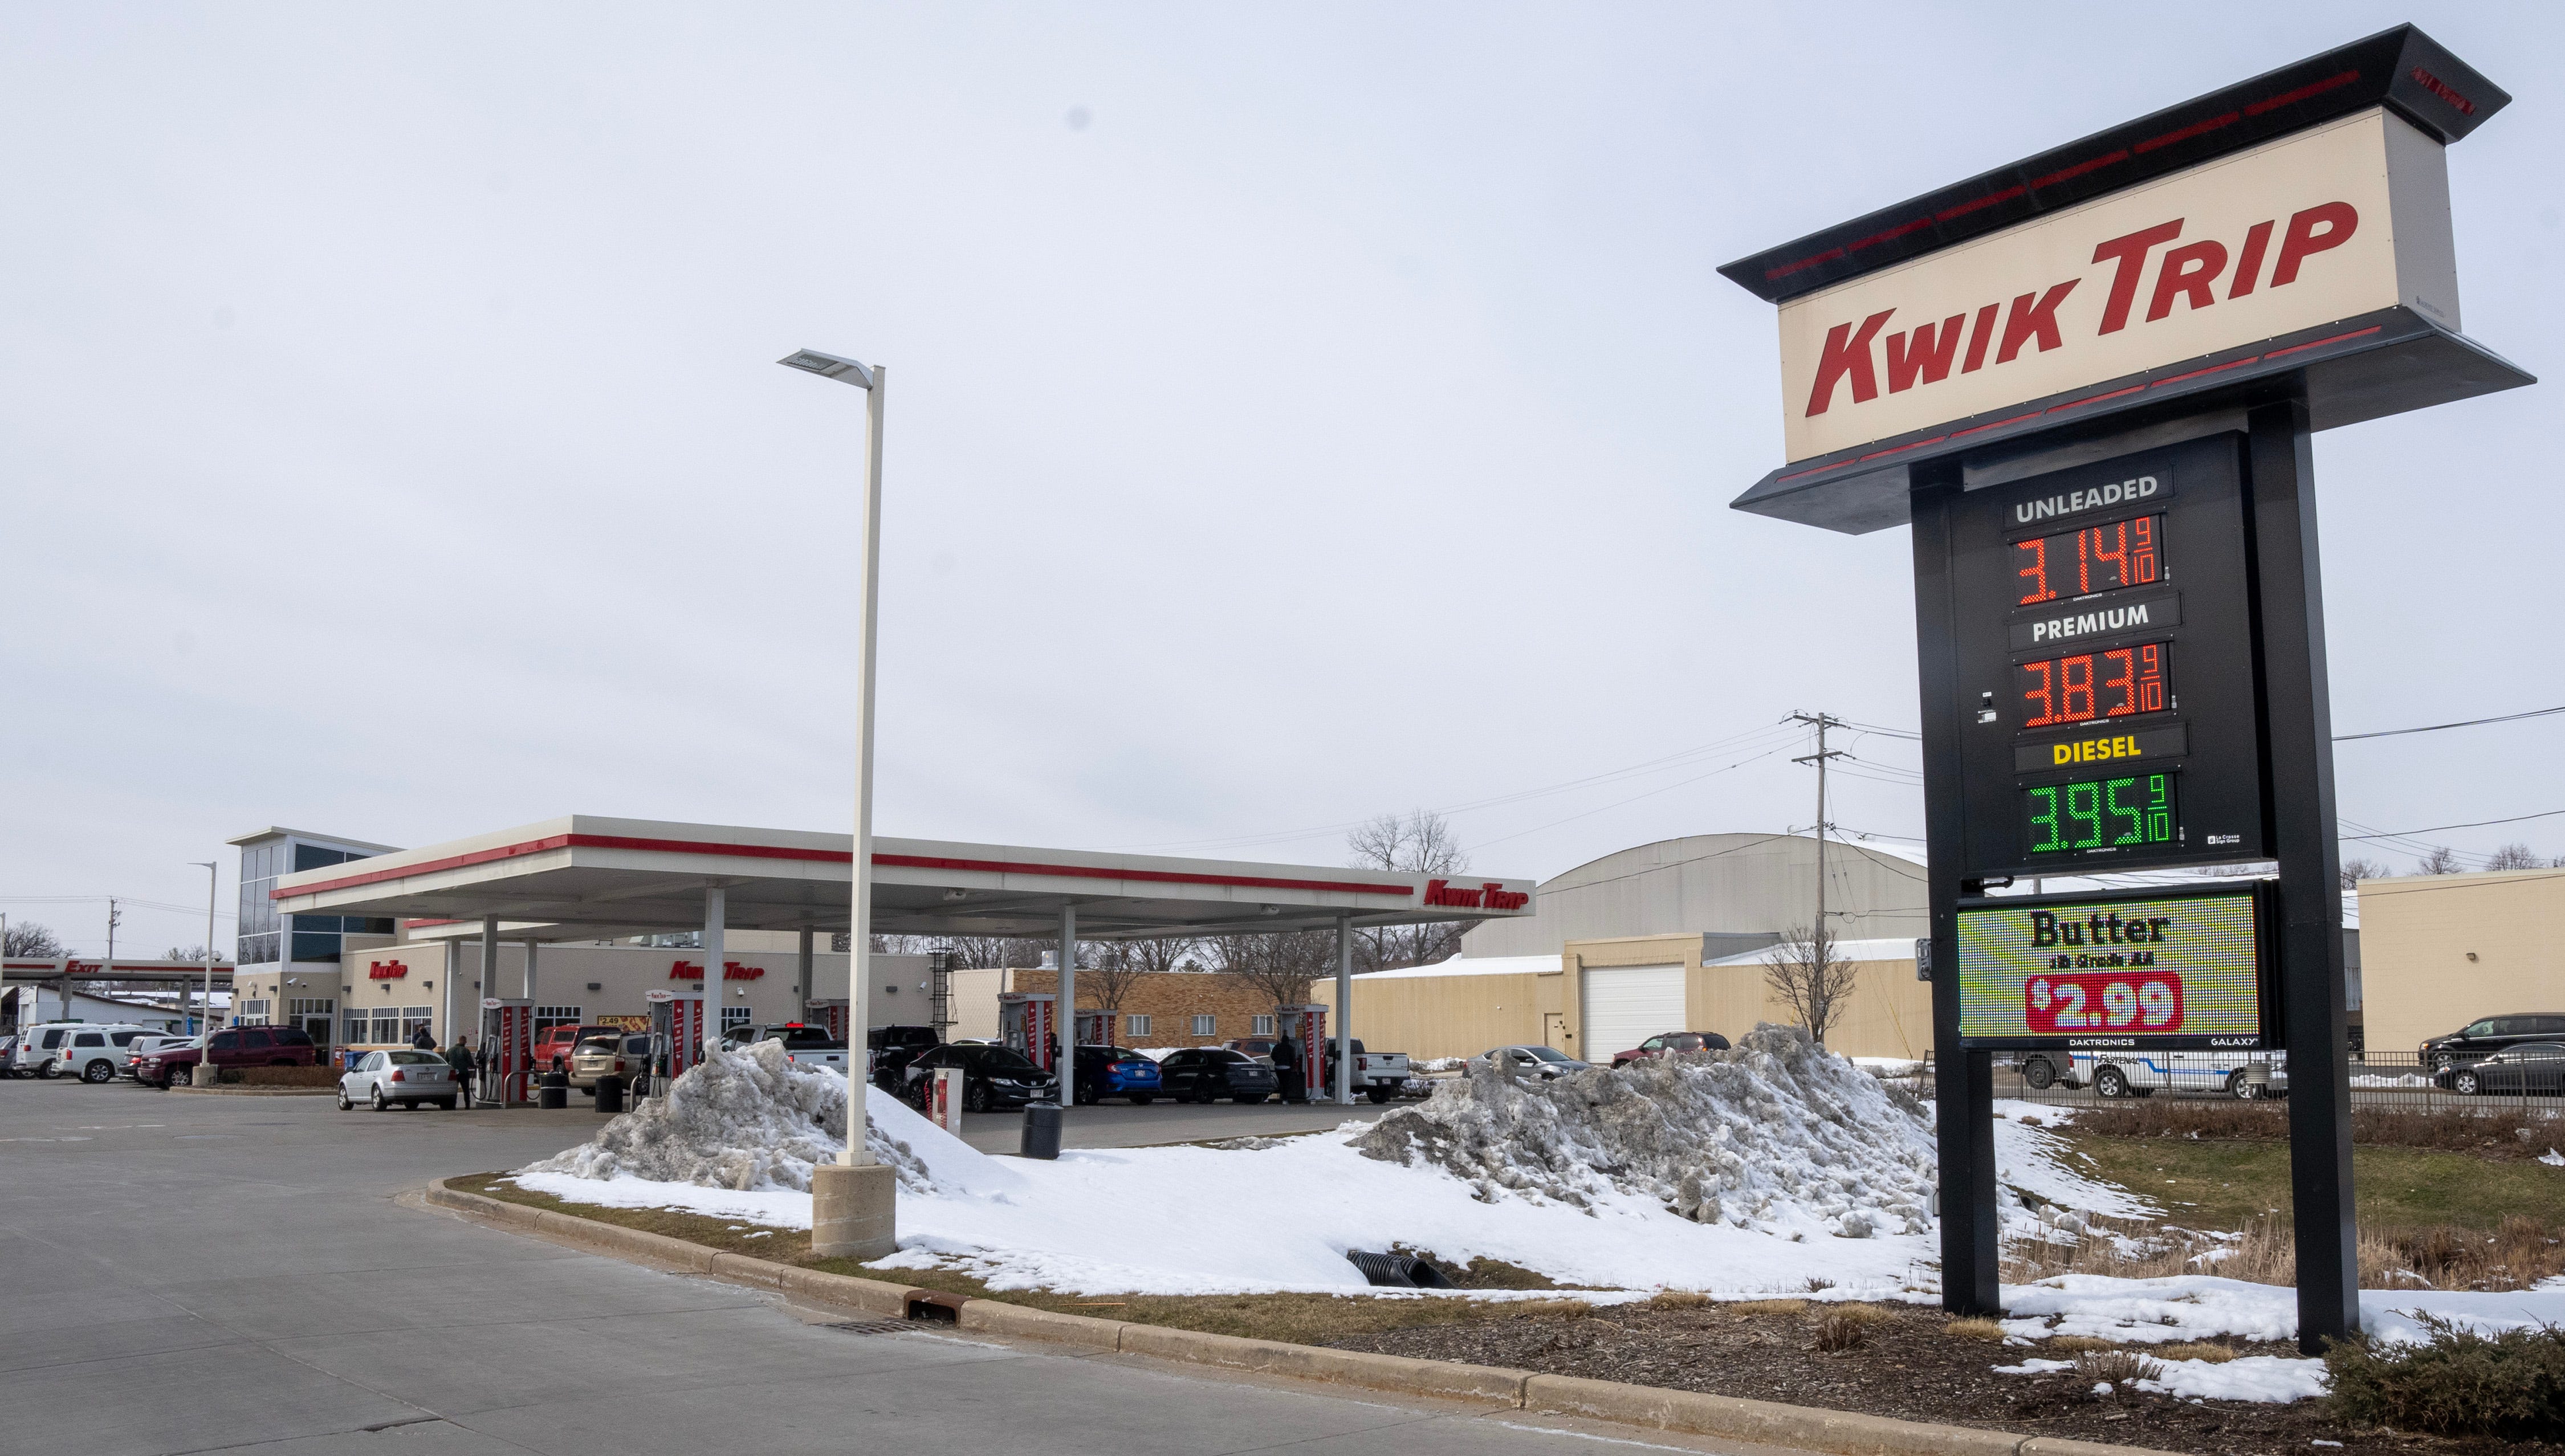 This Kwik Trip is shown at 12501 W. Arden Place in Butler, Wis. Bobbie Lou Schoeffling, 31, was found shot to death inside her home two weeks after telling a Milwaukee Police officer on July 15 that her ex-boyfriend beat her in a car in front of her children about 30 minutes earlier.